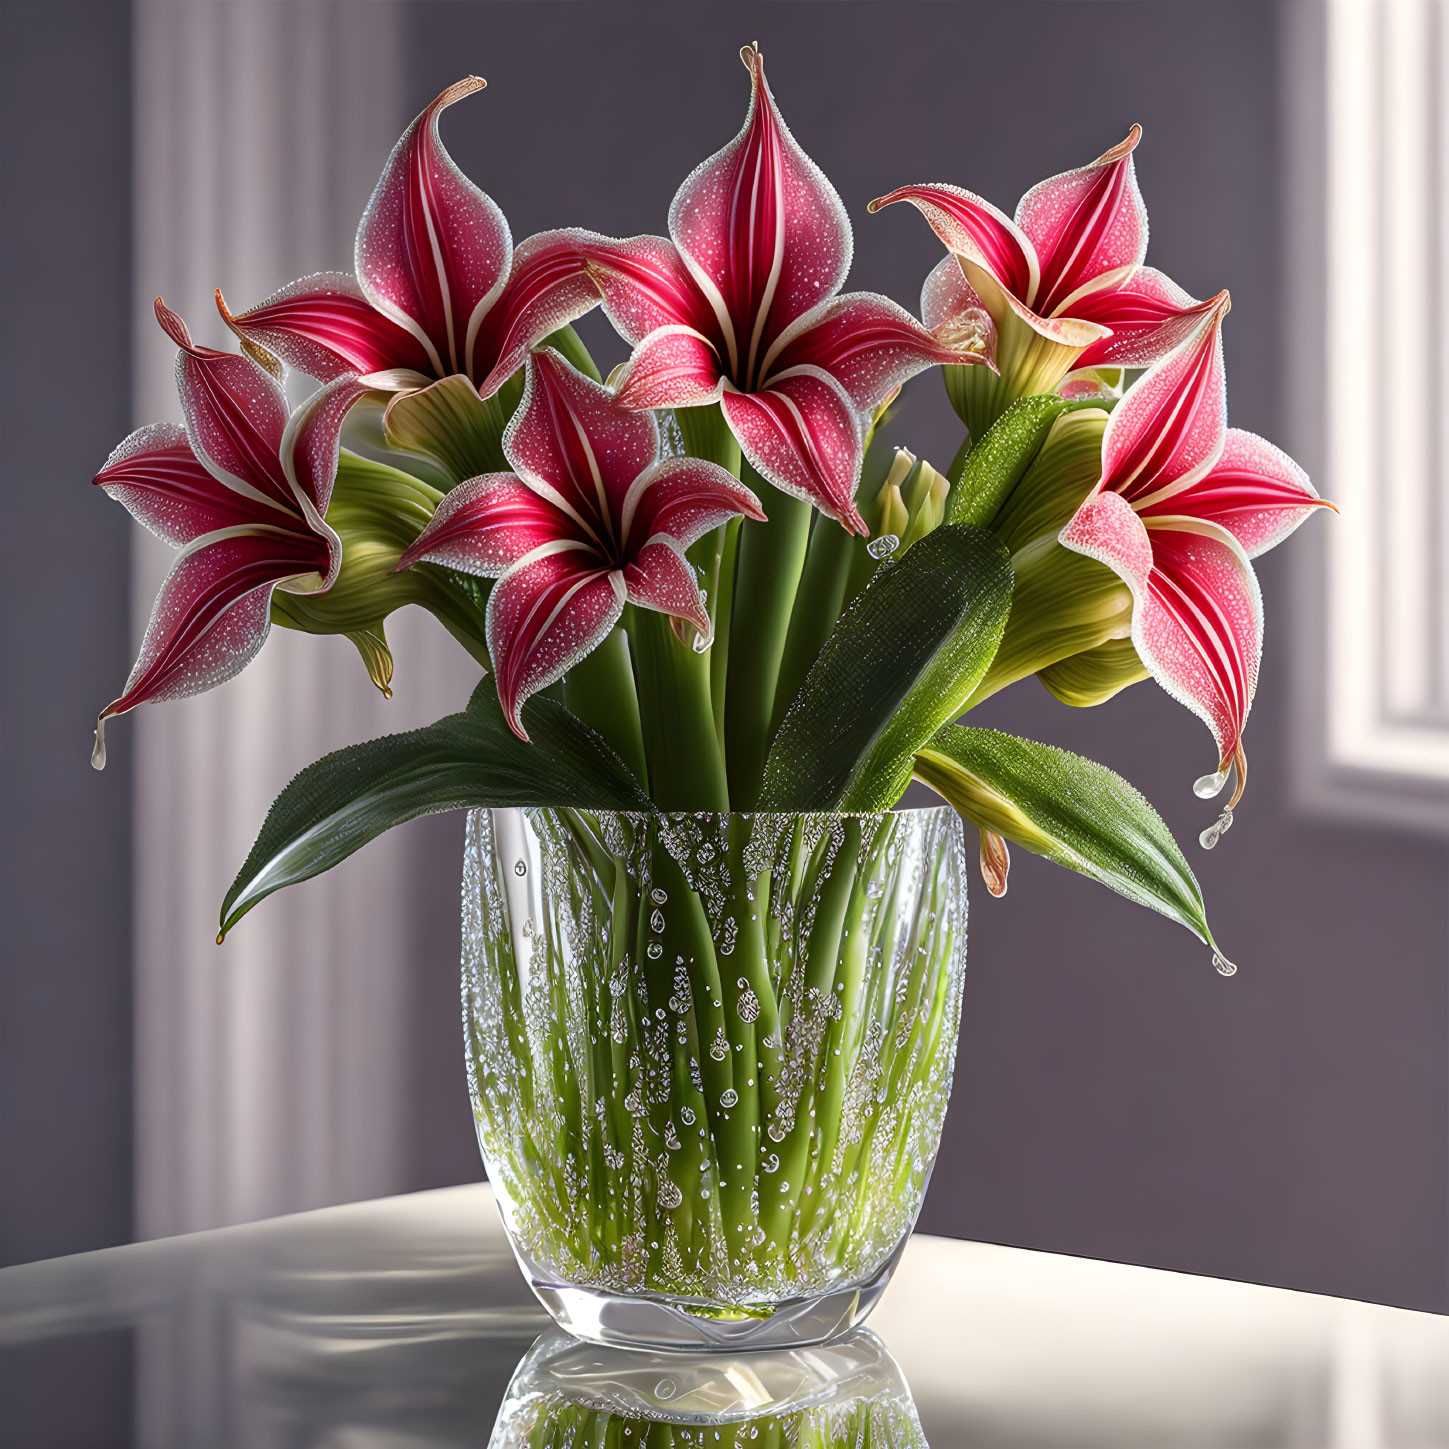 Pink and White Lilies Bouquet in Clear Vase on Reflective Surface